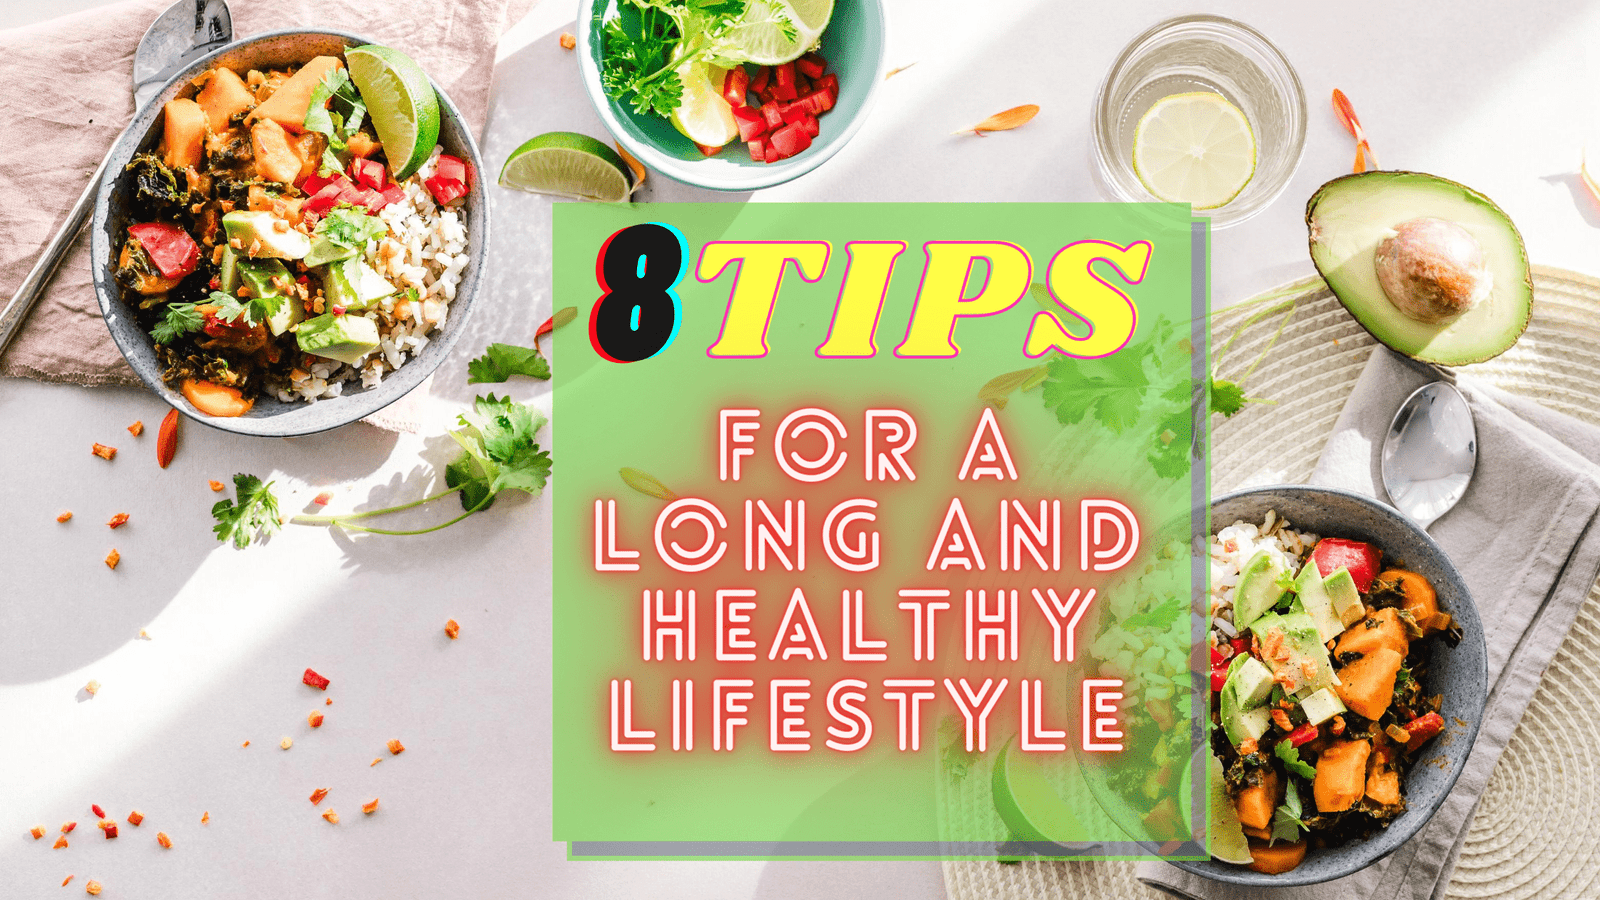 You are currently viewing HEALTHY LIFESTYLE :8 TIPS FOR A LONG AND HEALTHY LIFESTYLE